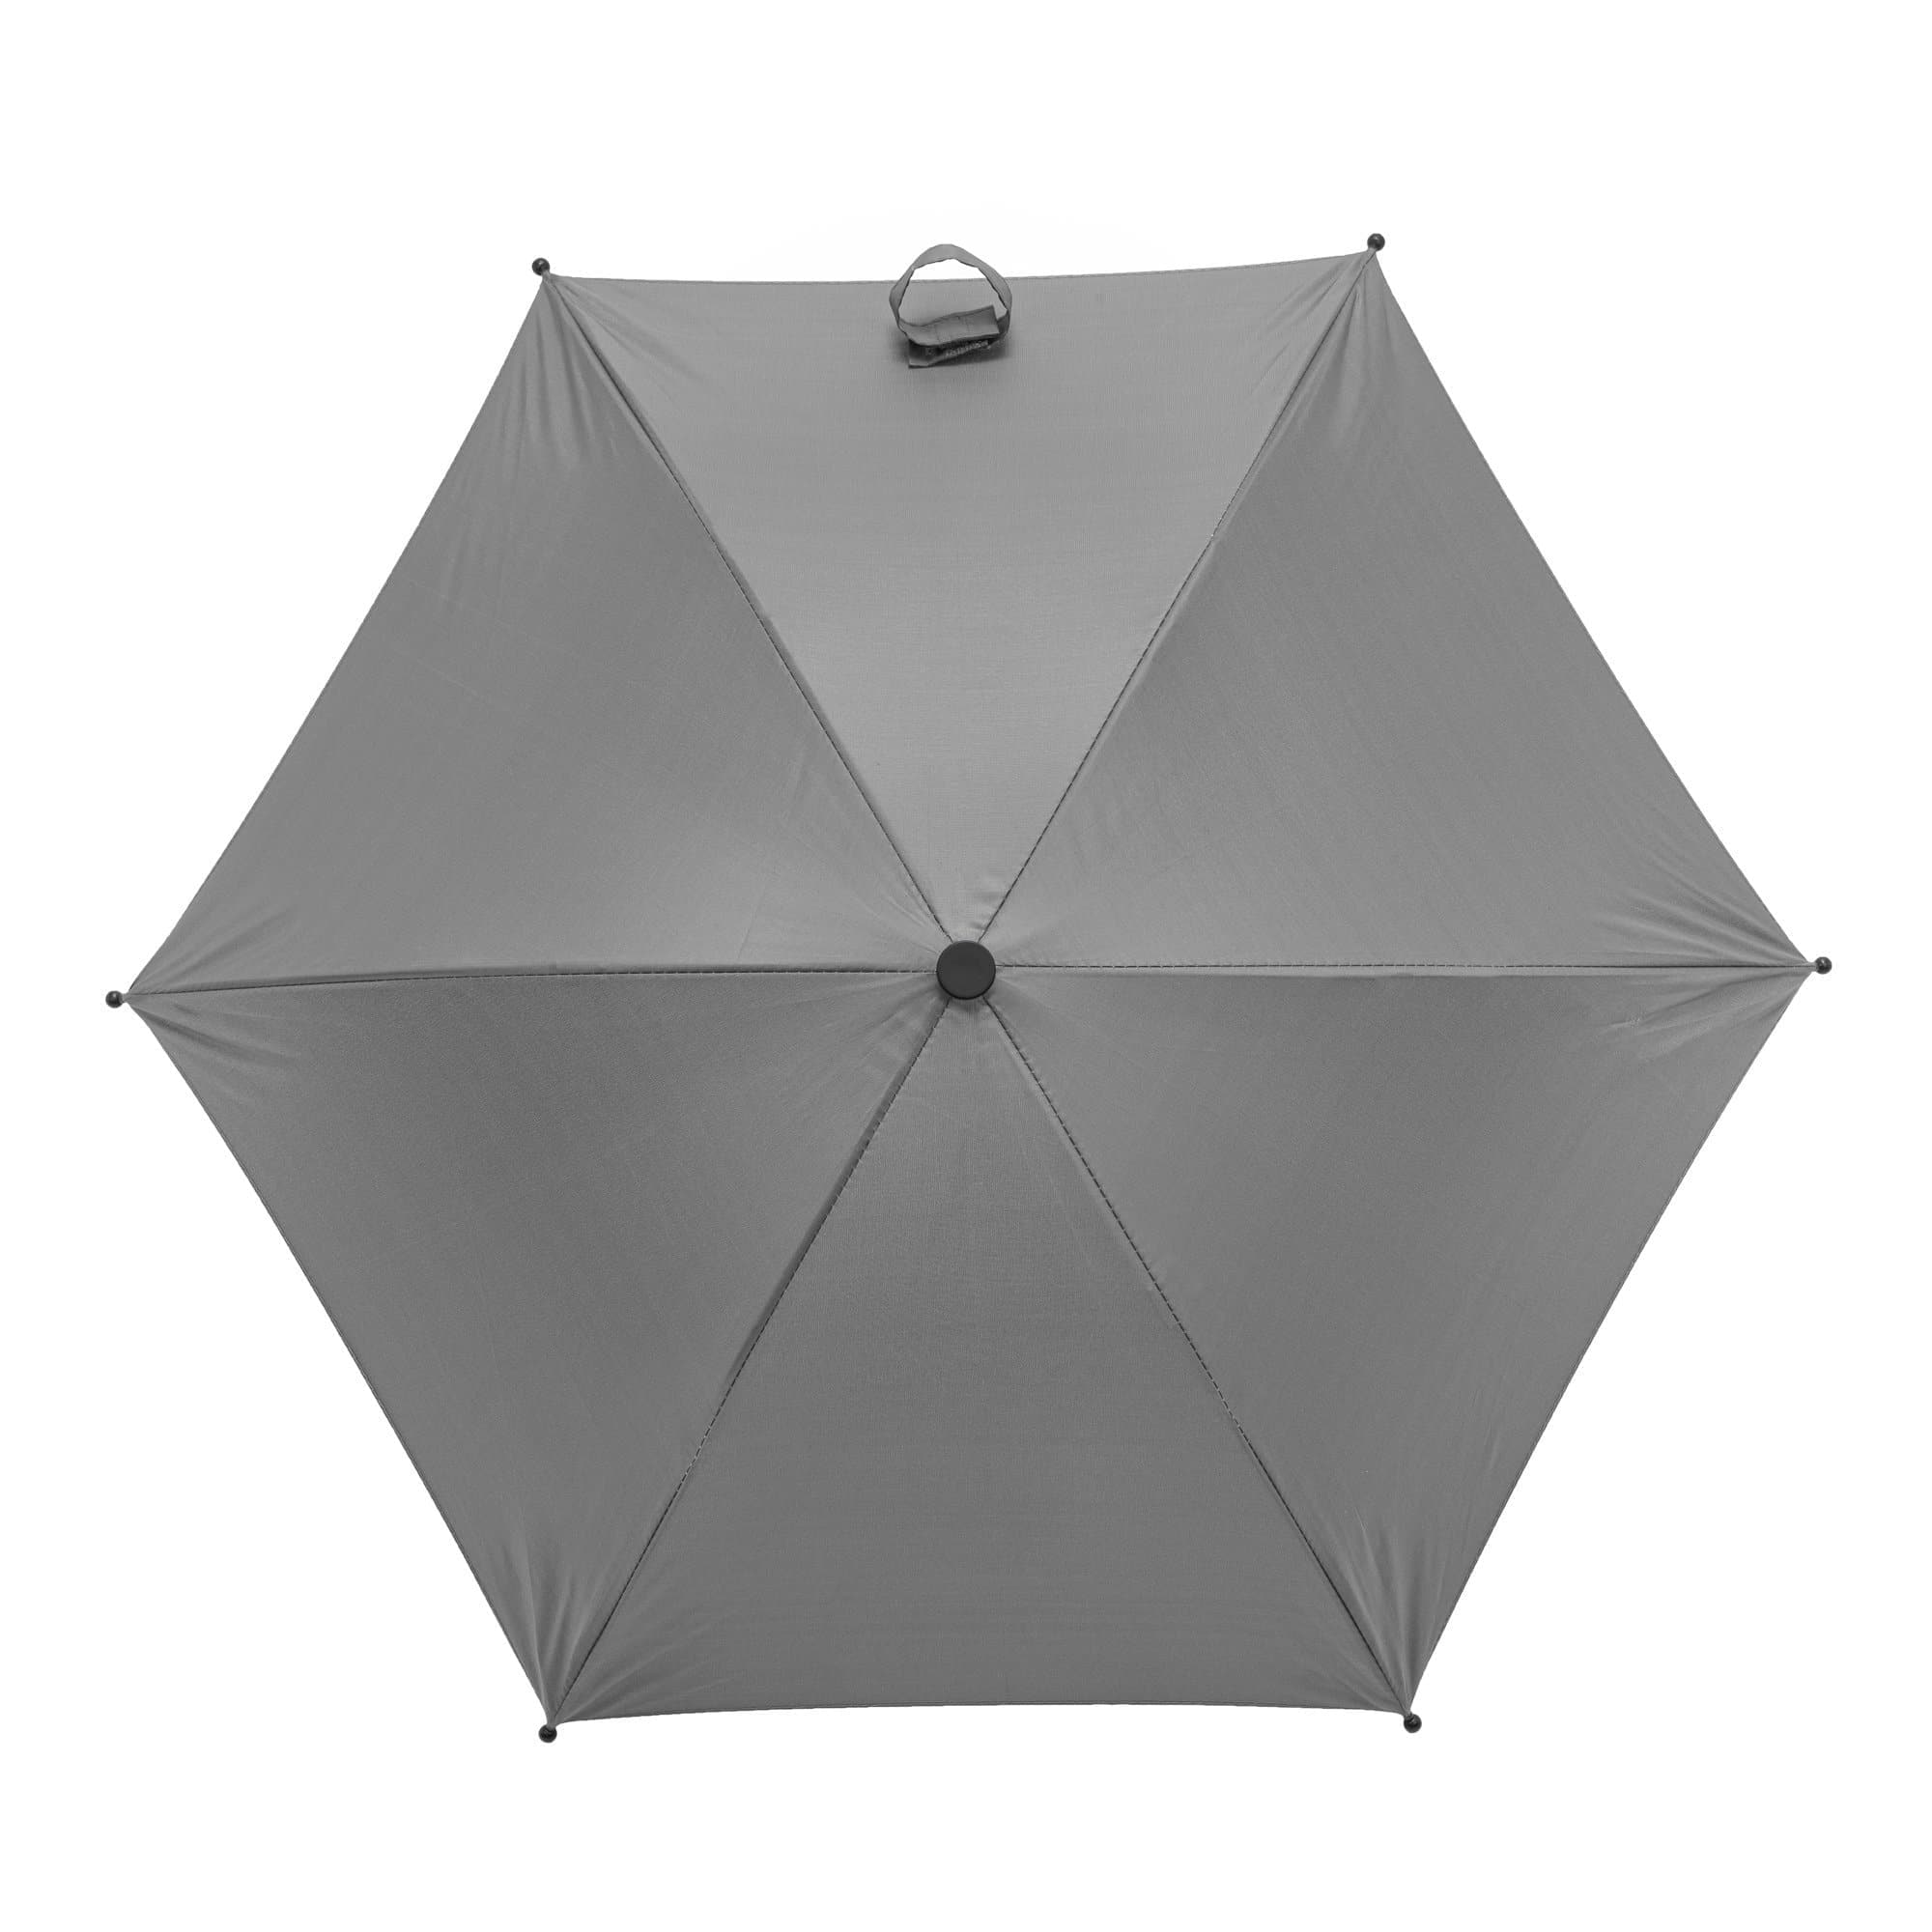 Baby Parasol Compatible With Hesba - Fits All Models - For Your Little One